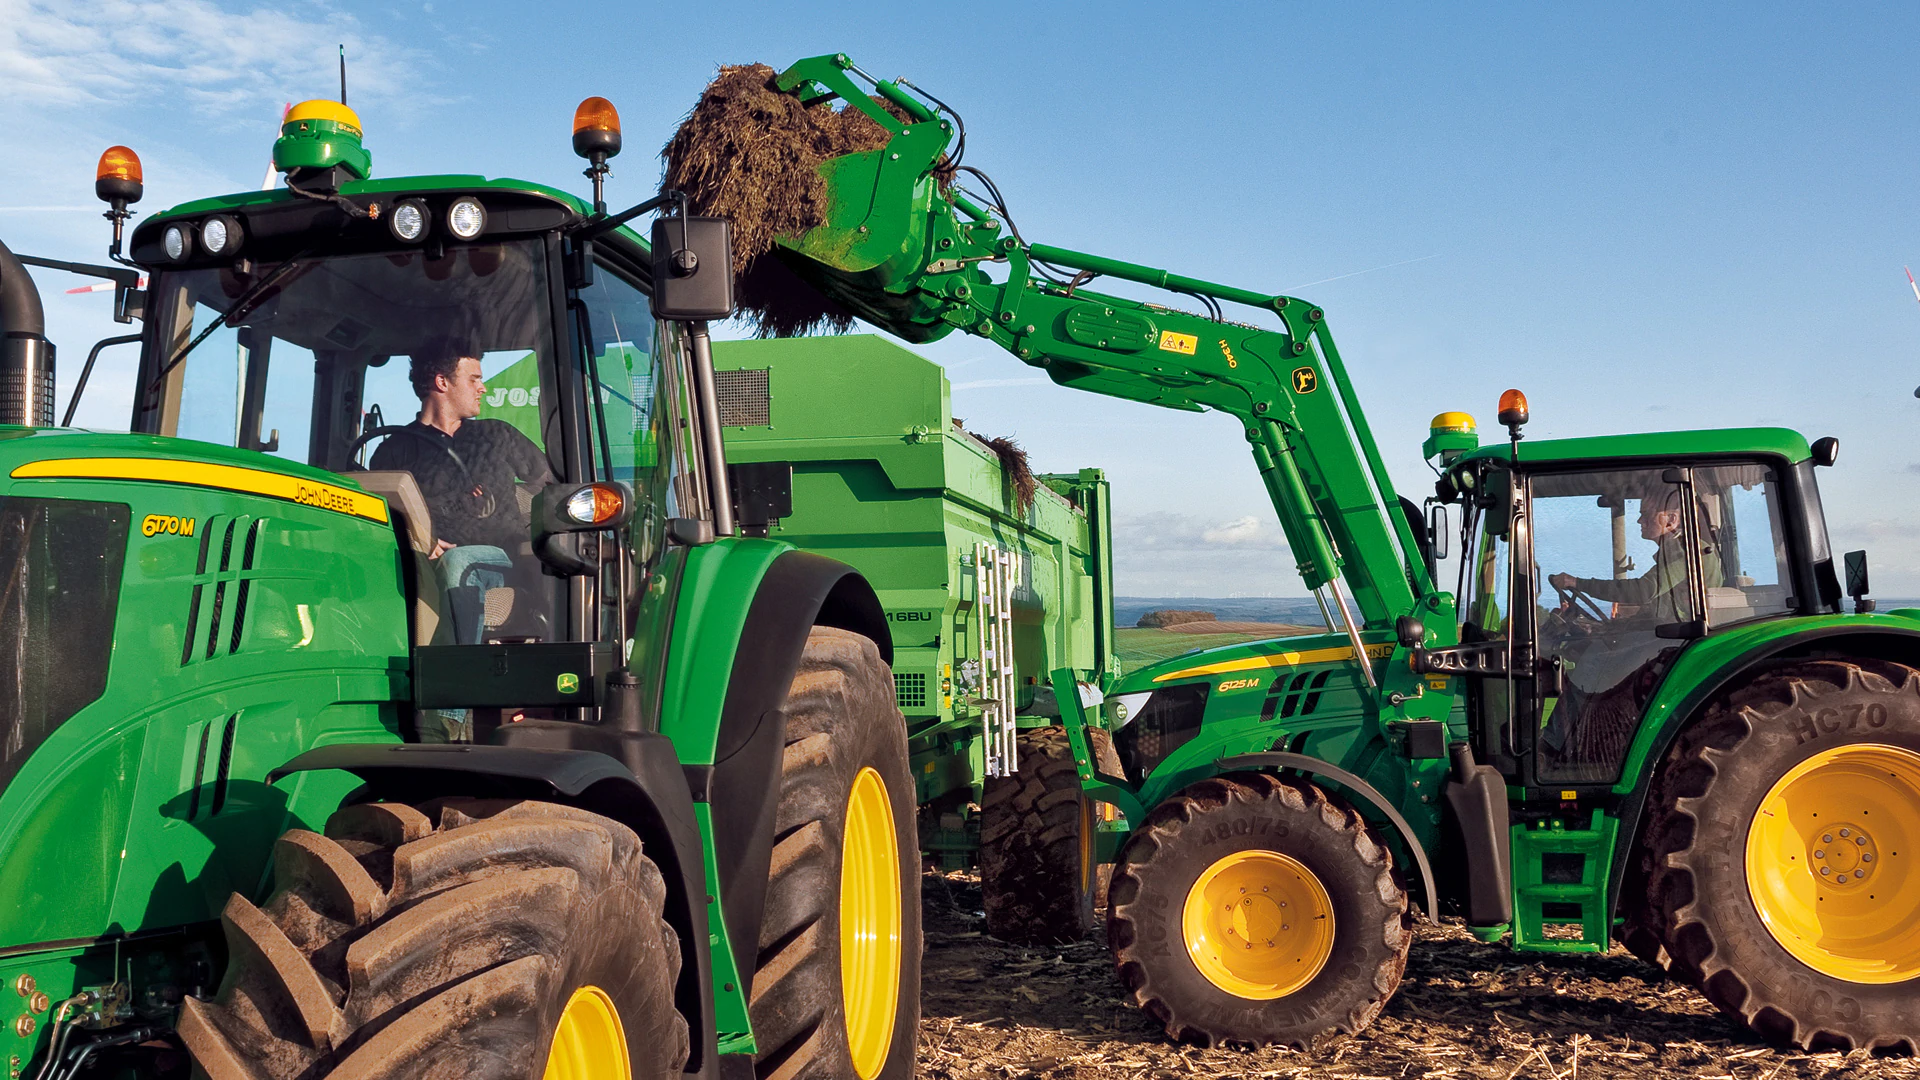 image of tractor working with attachments in field